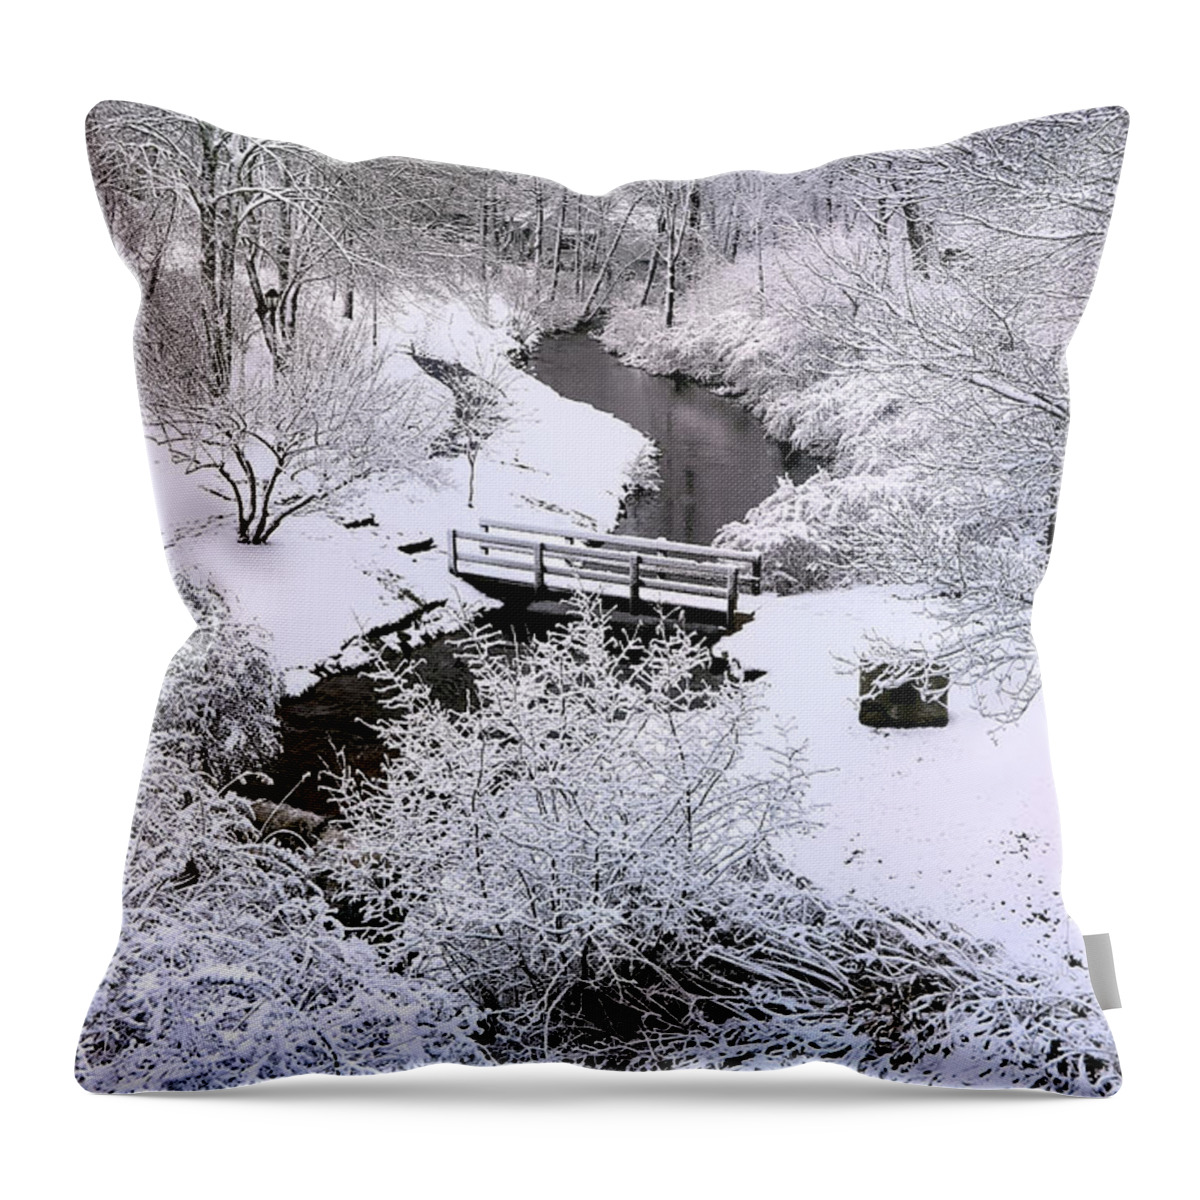 Town Brook Throw Pillow featuring the photograph Snowy Town Brook Plymouth by Janice Drew